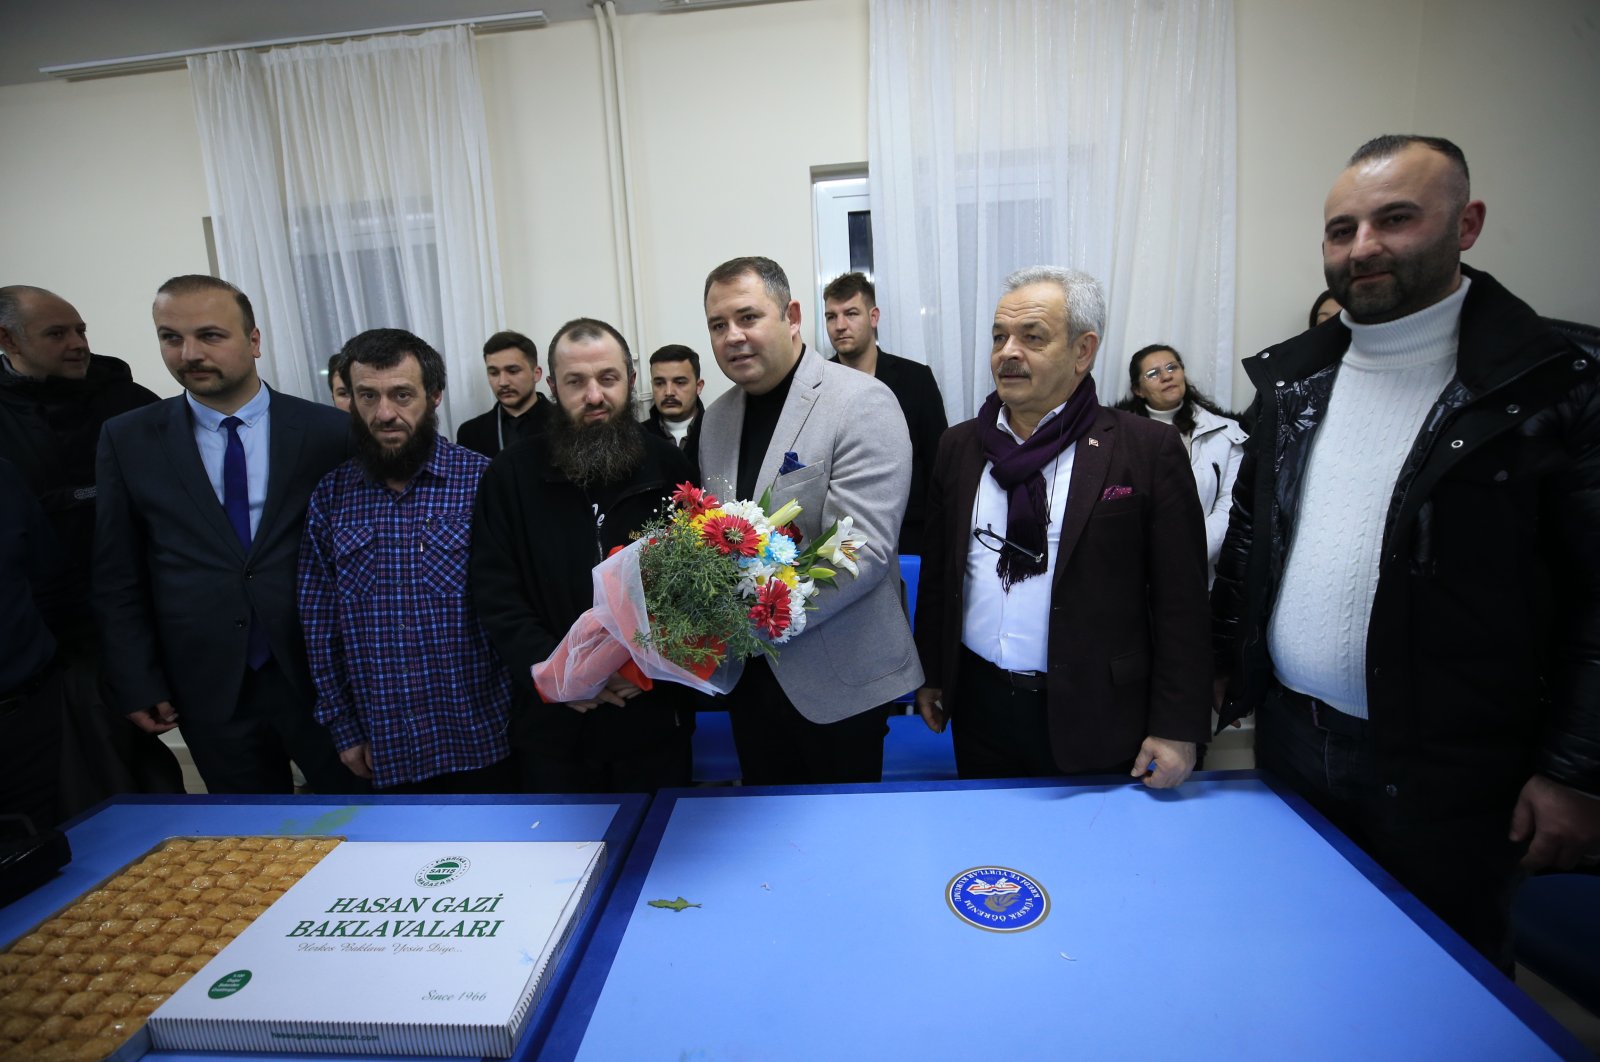 Crimean Tatars meet with local branch officials of the MHP in Kırklareli, Turkey, March 6, 2022. (AA Photo)